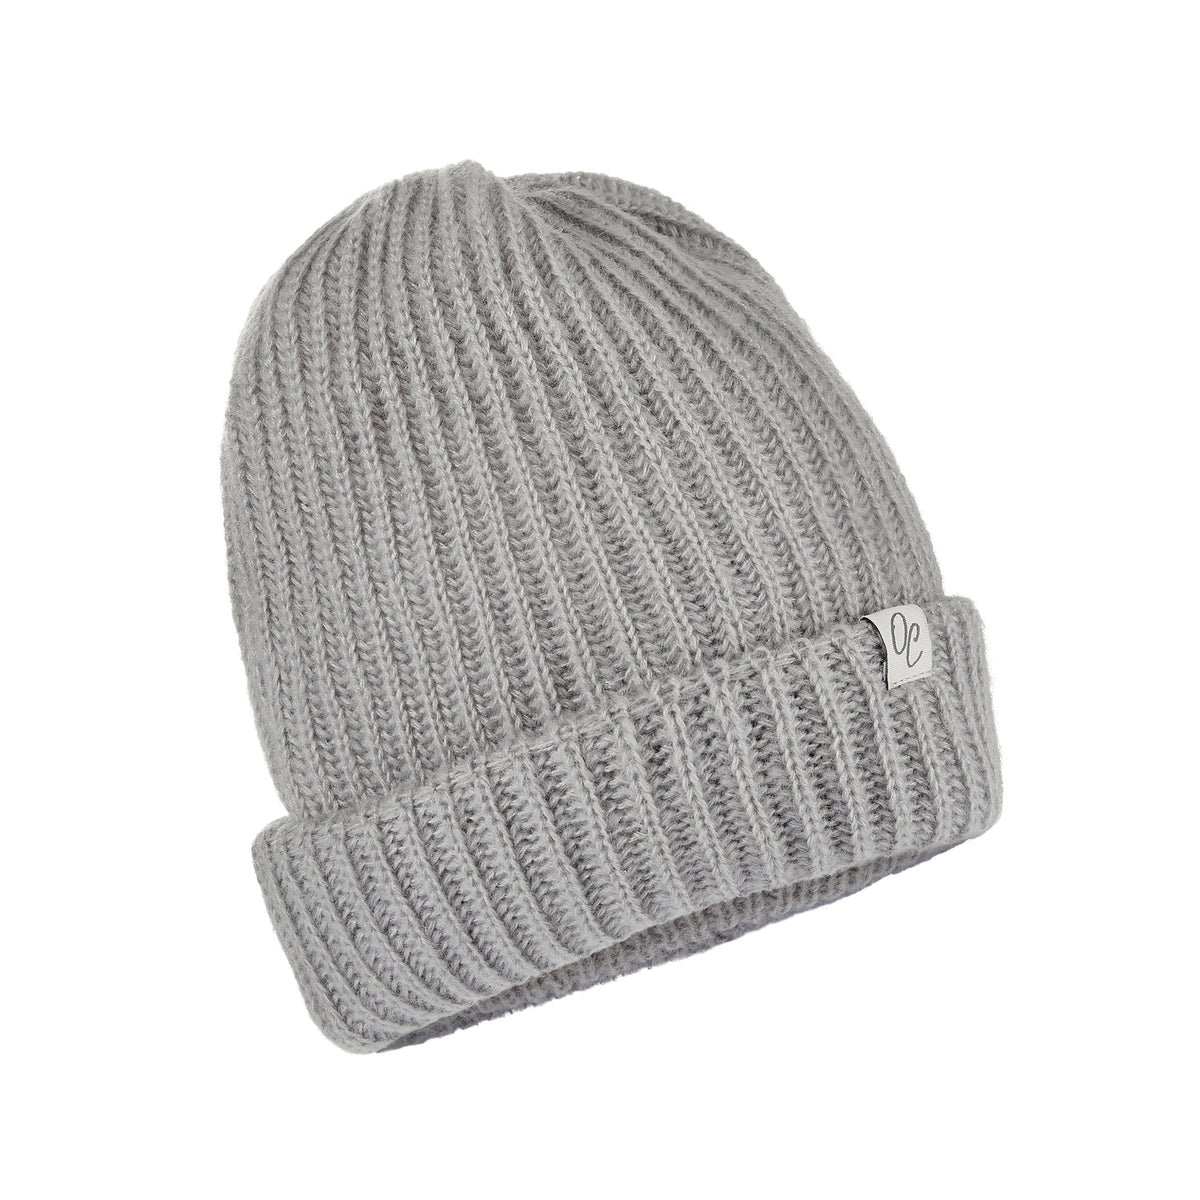 Only Curls Satin Lined Grey Knitted Beanie Hat